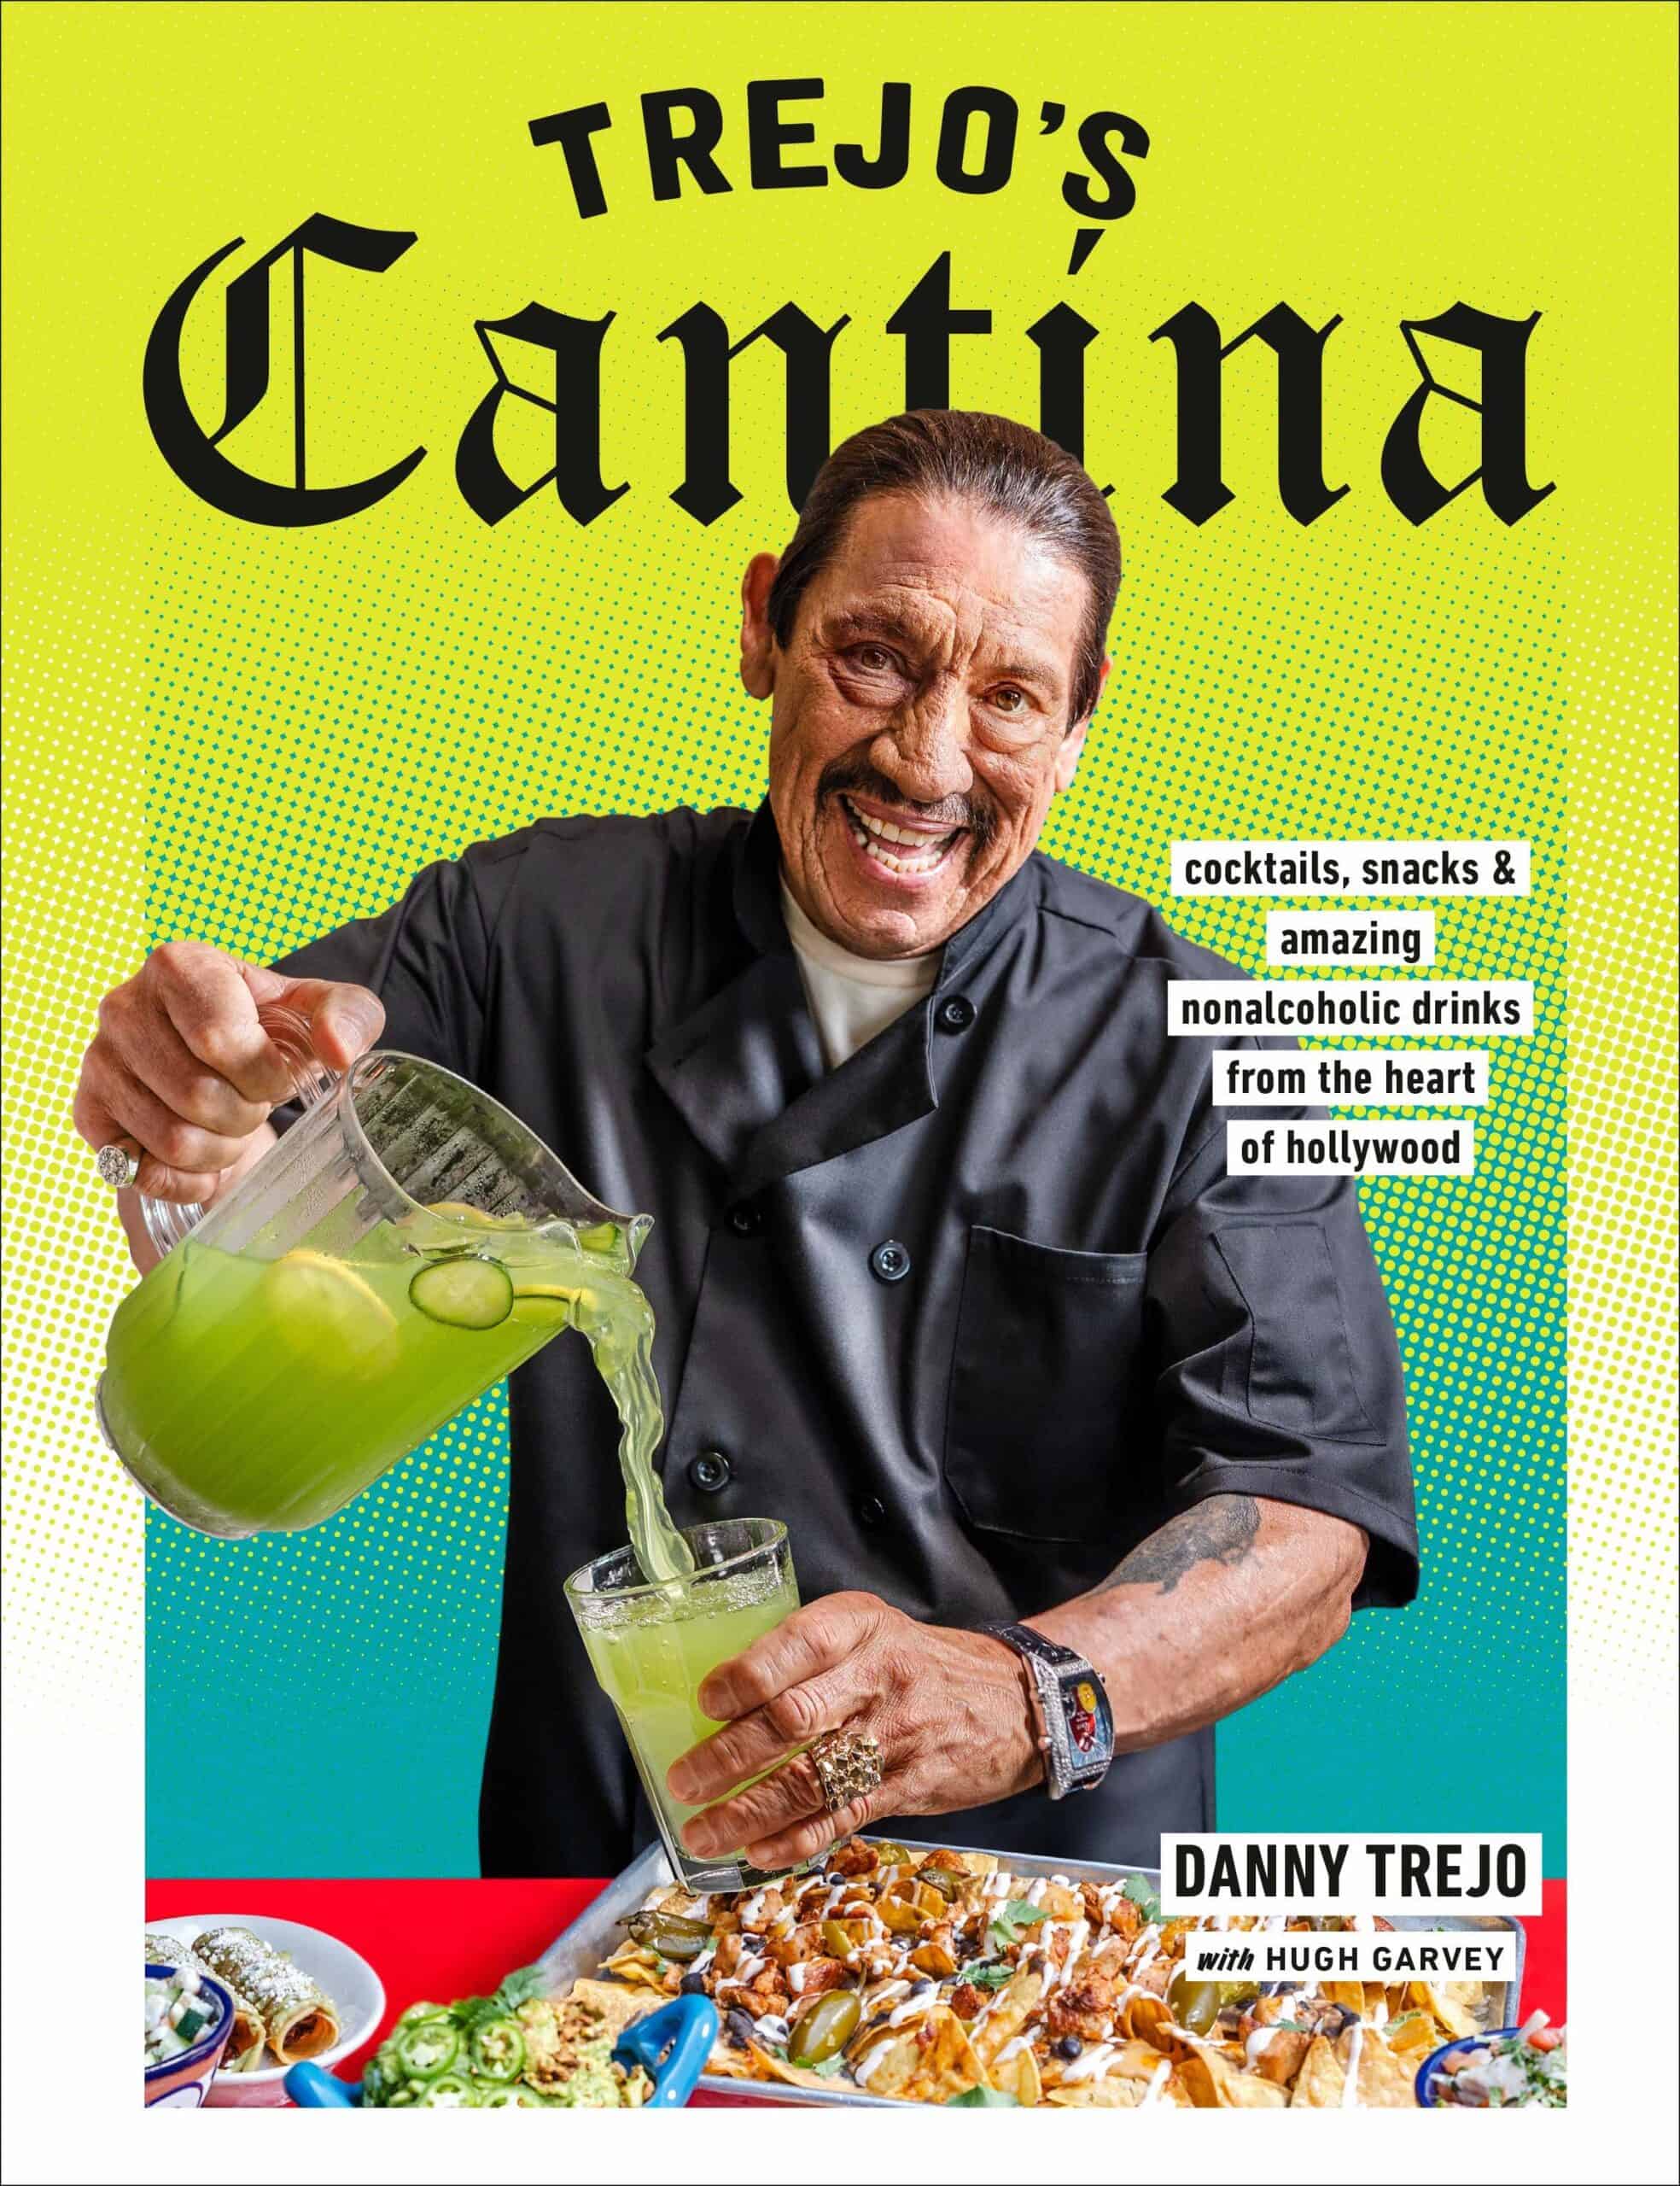 An Evening with Danny Trejo